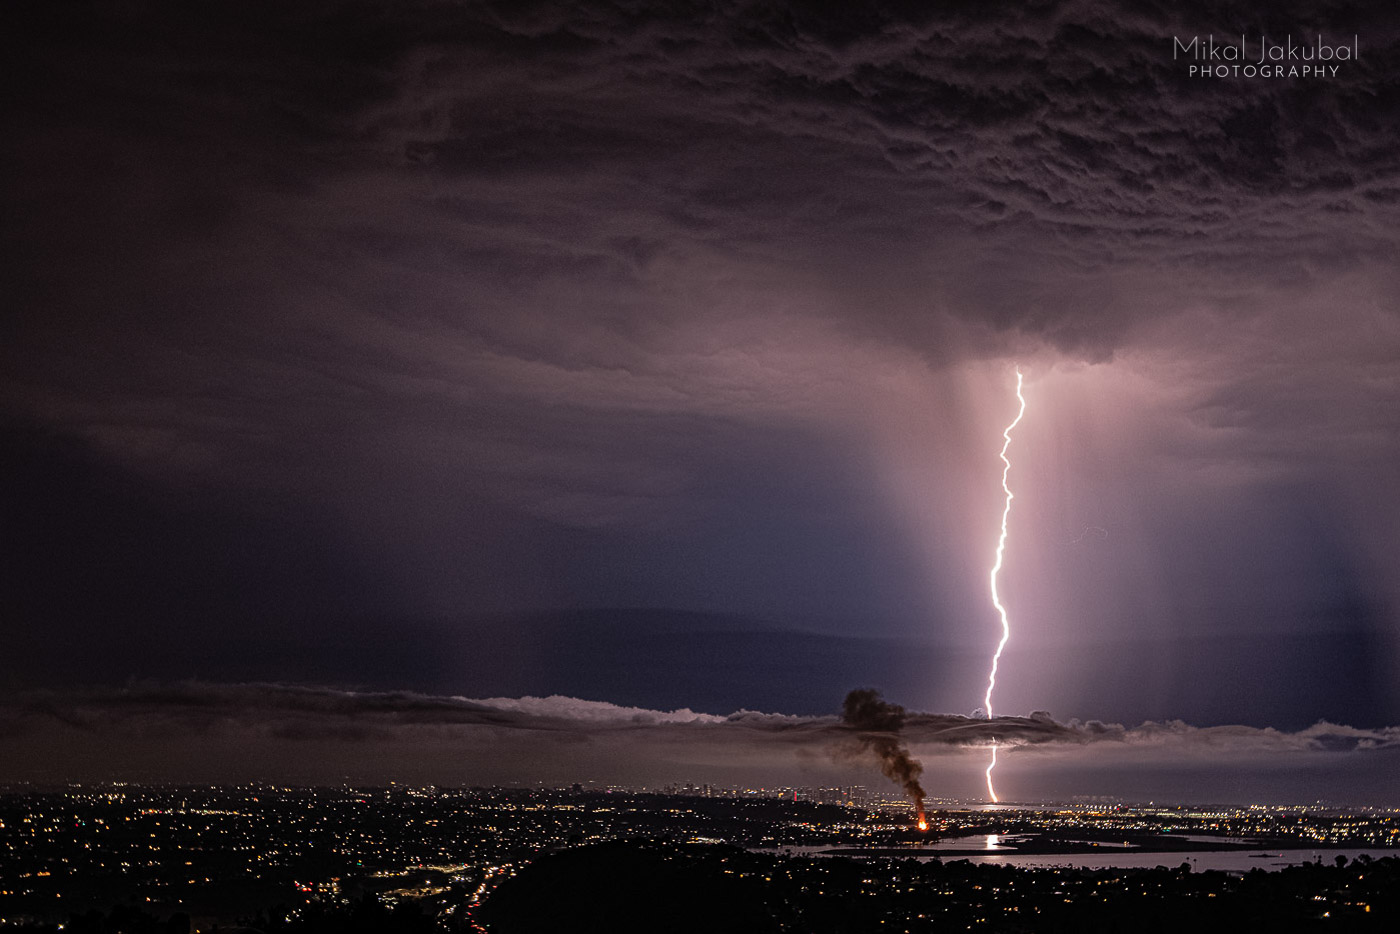 The scene is nighttime over the city of San Diego. A purple bolt of lightning drops straight down from purplish rain clouds. Almost in line with the bolt, a large flame shoots up and a smoke cloud drifts off from burning palm trees that were hit by a previous strike.